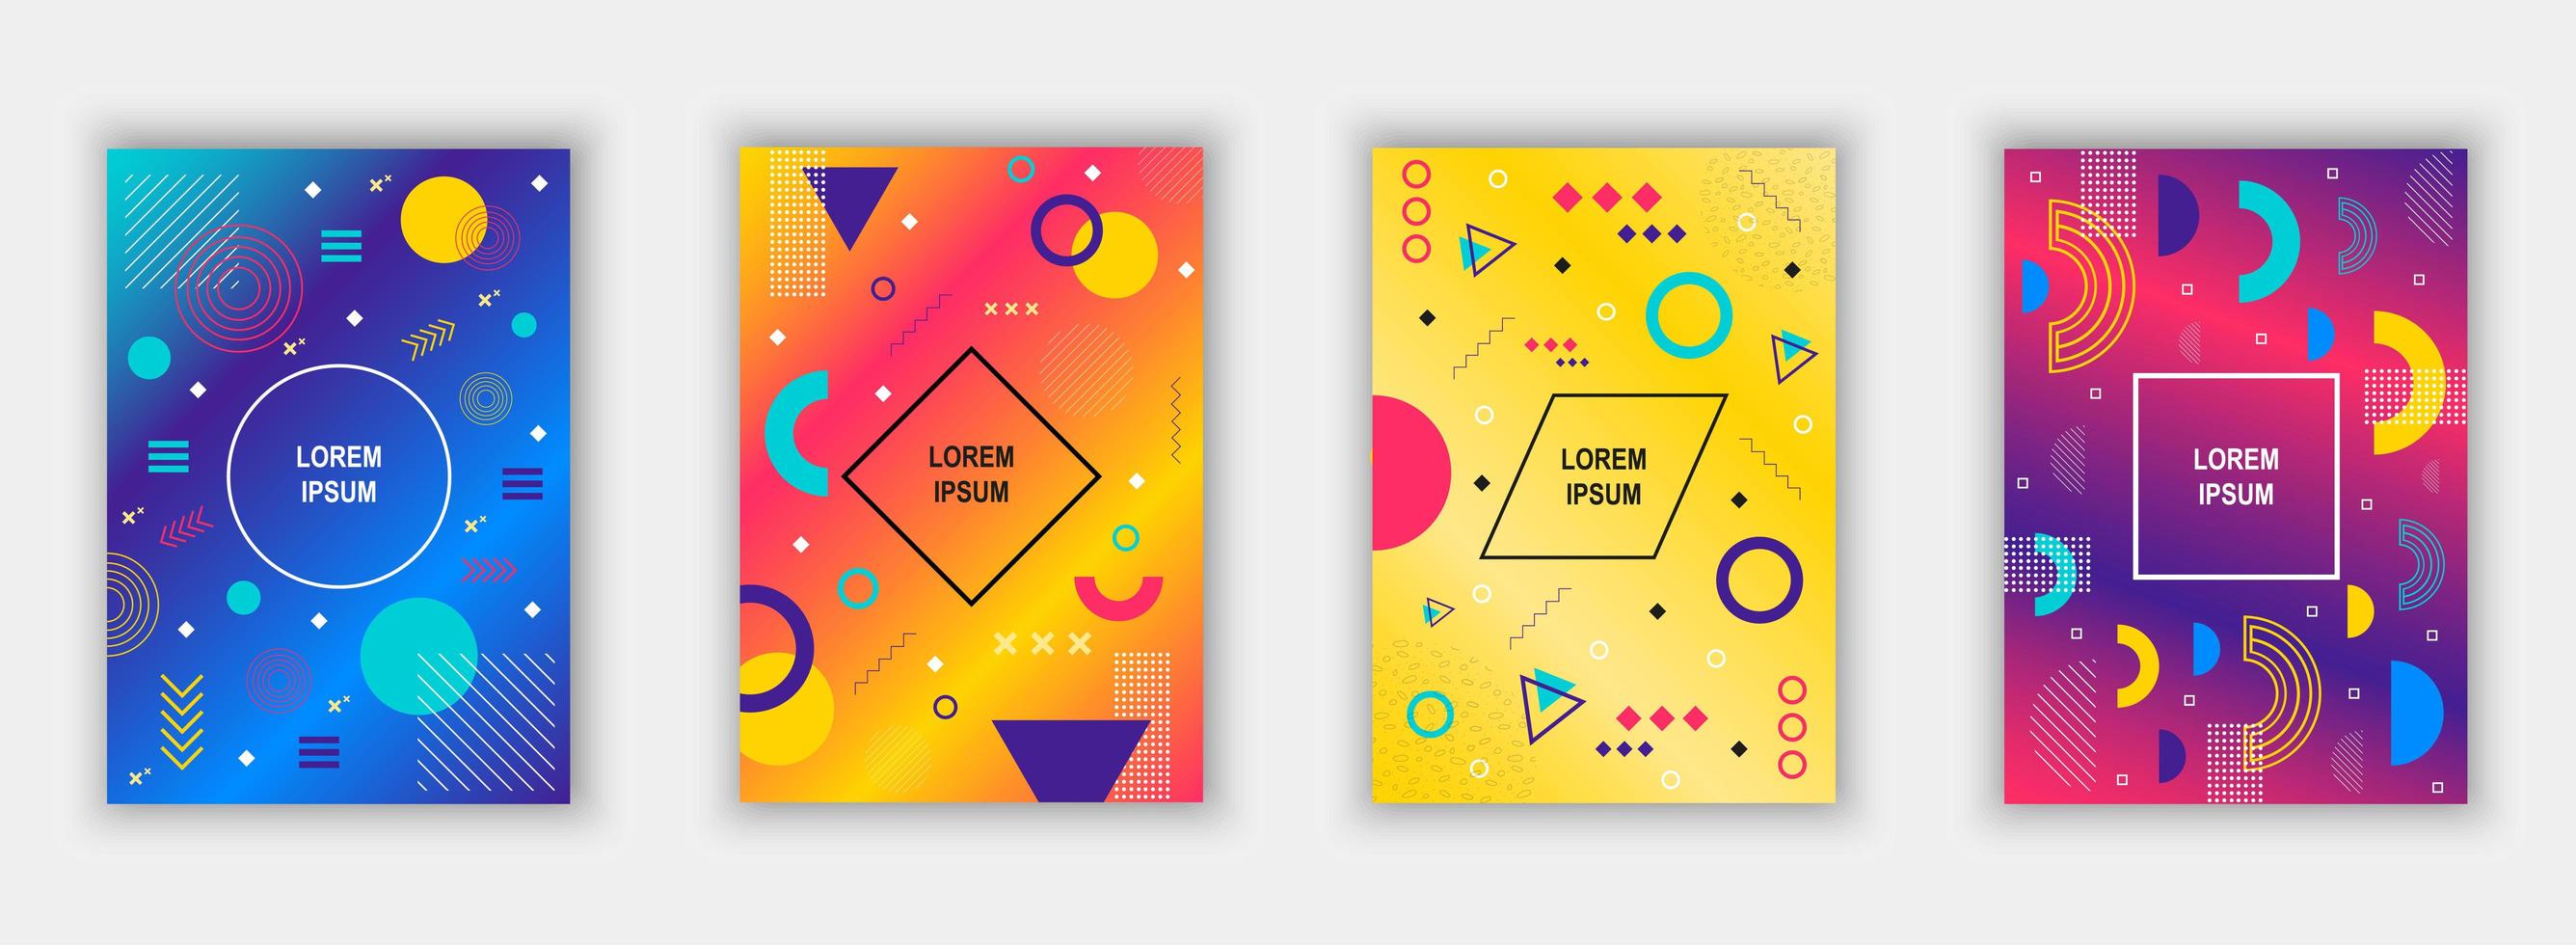 Set of modern memphis style covers. vector